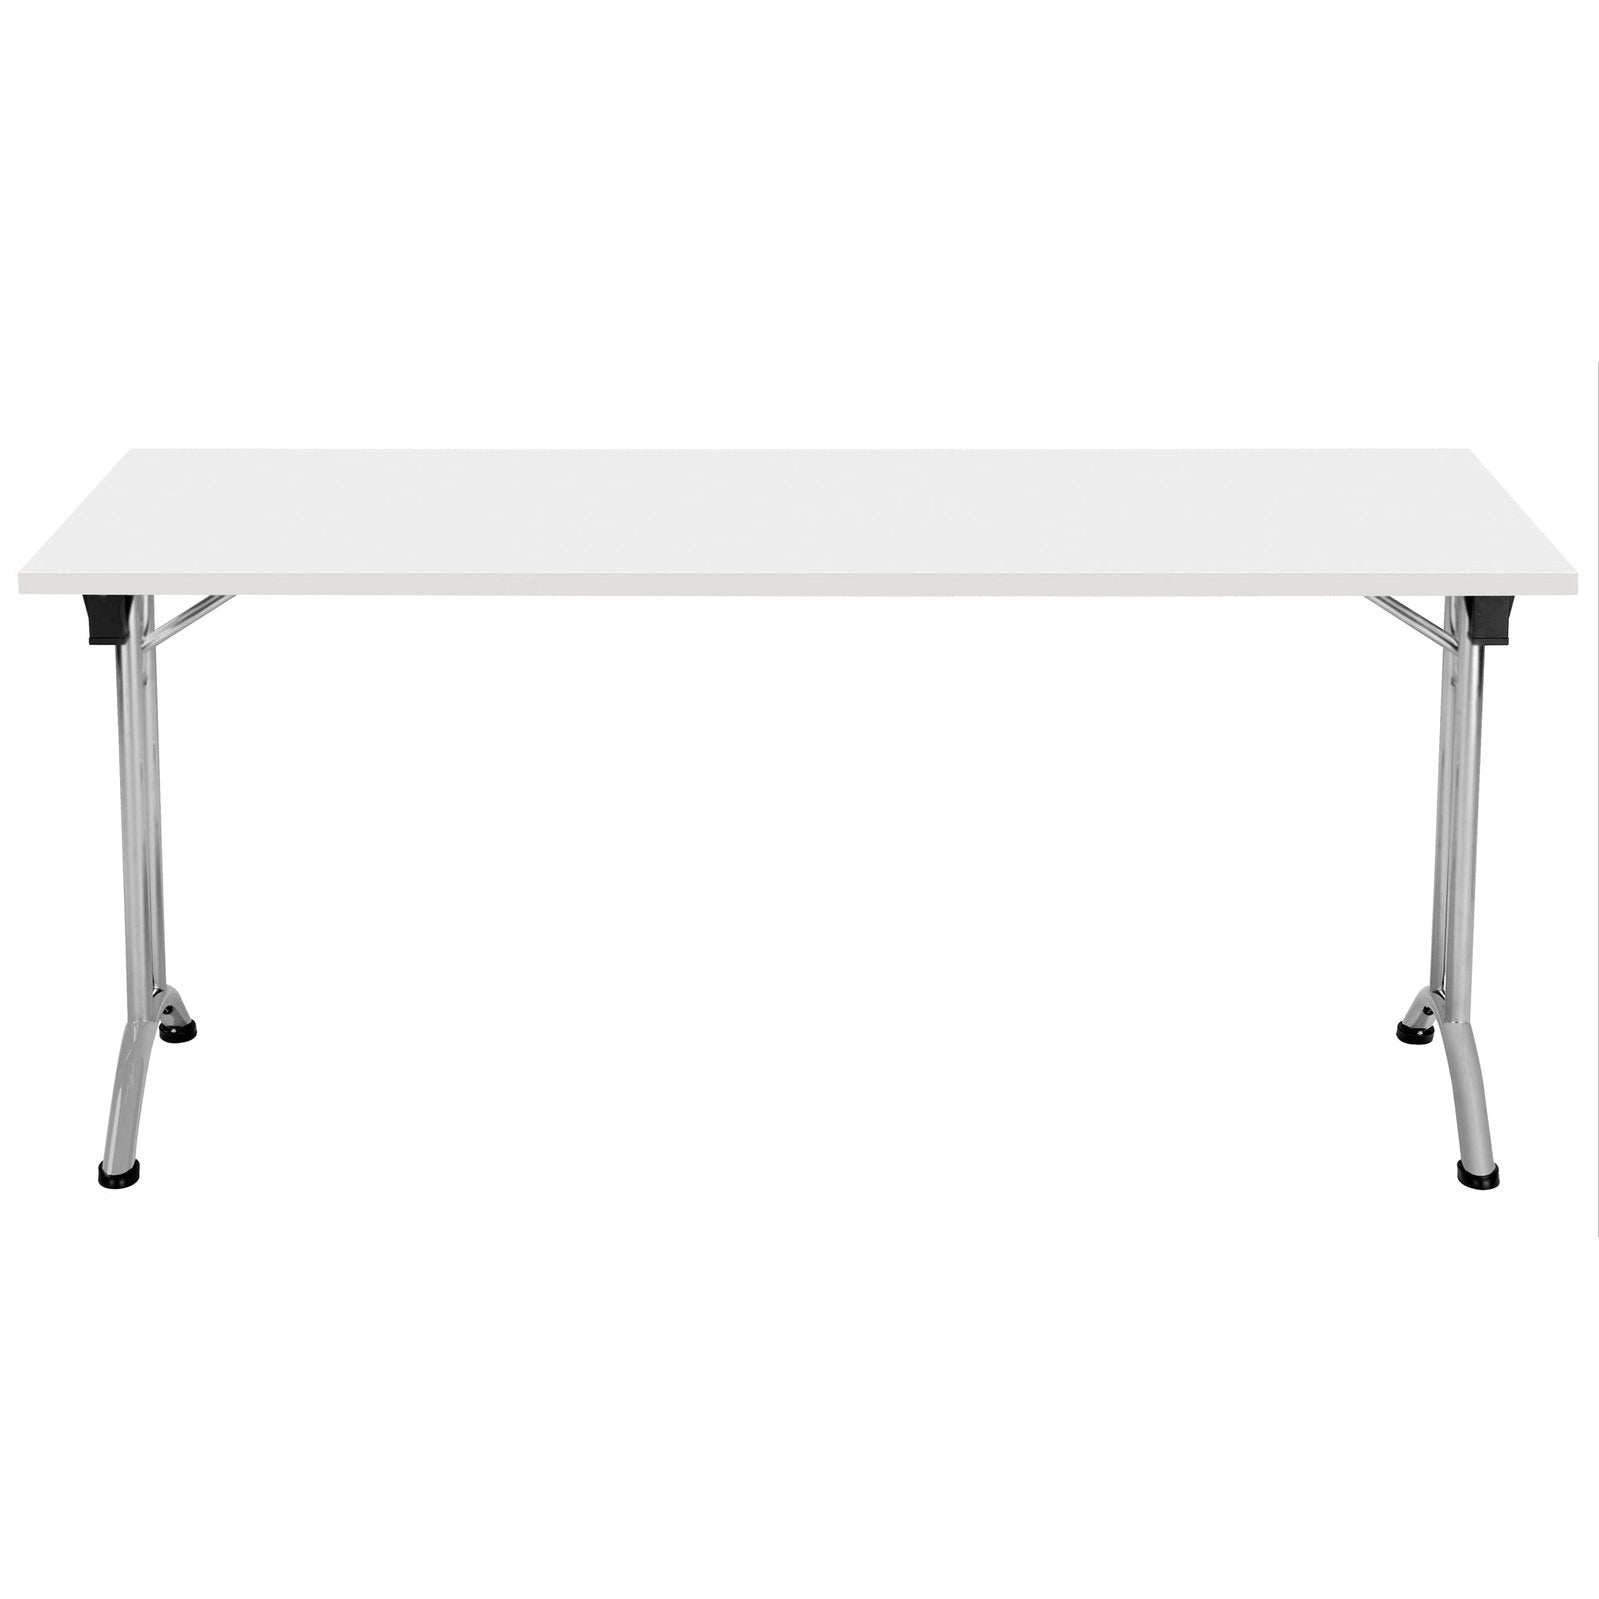 One Union Straight 1600mm Folding Table